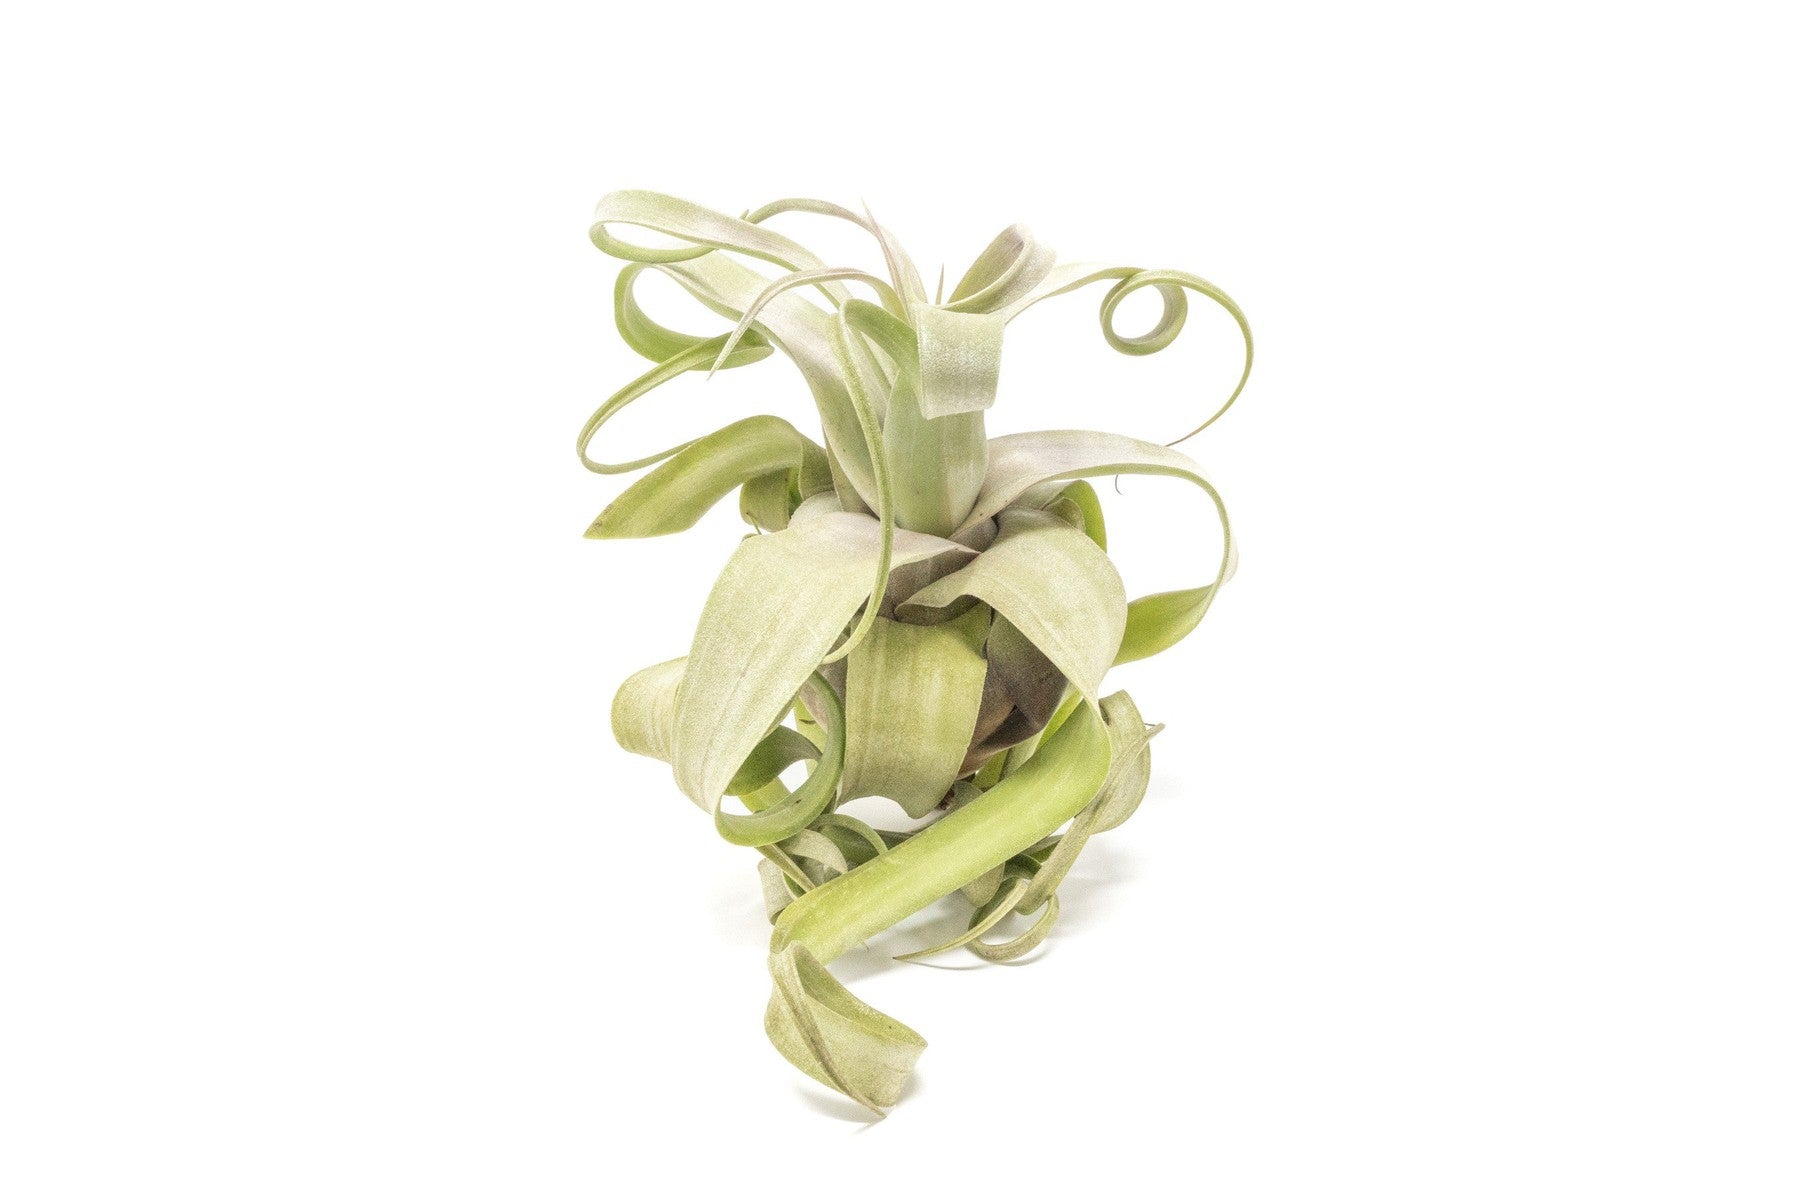 SALE - Tillandsia Streptophylla Air Plants - Set of 3 or 6 - 30% Off-airplant-The Succulent Source